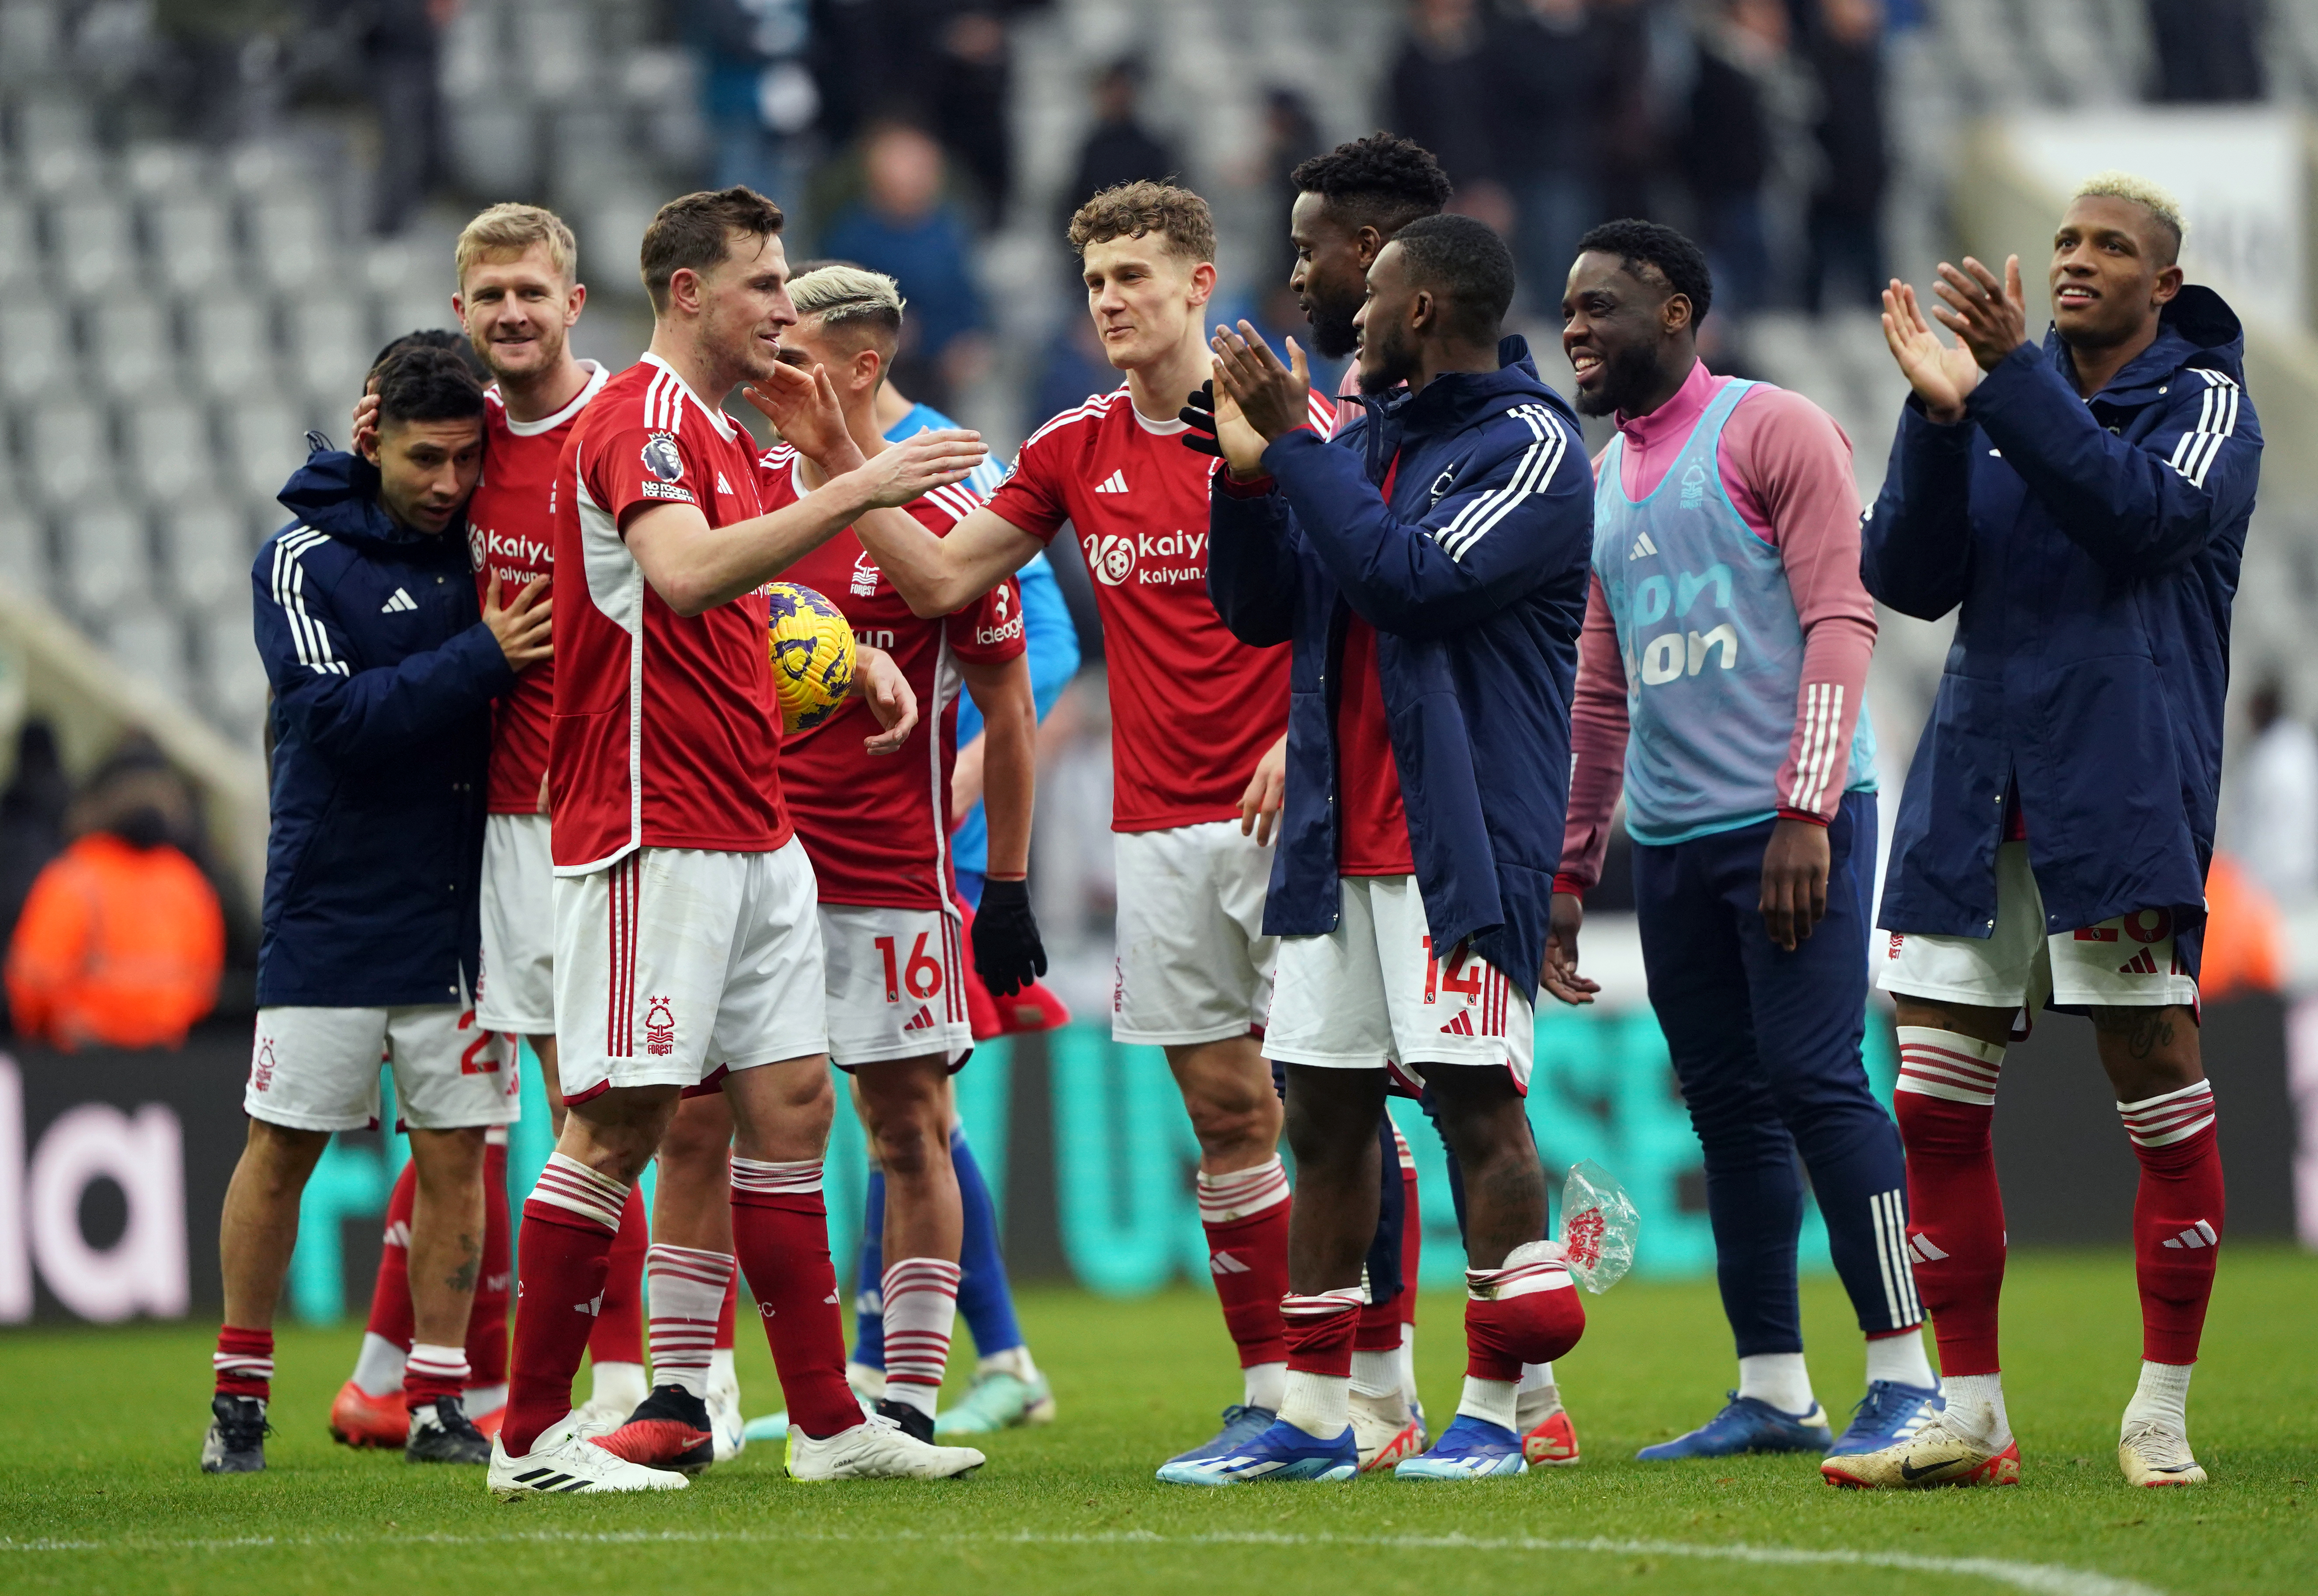 Nottingham Forest’s Chris Wood celebrates with his team-mates after the final whistle at Newcastle